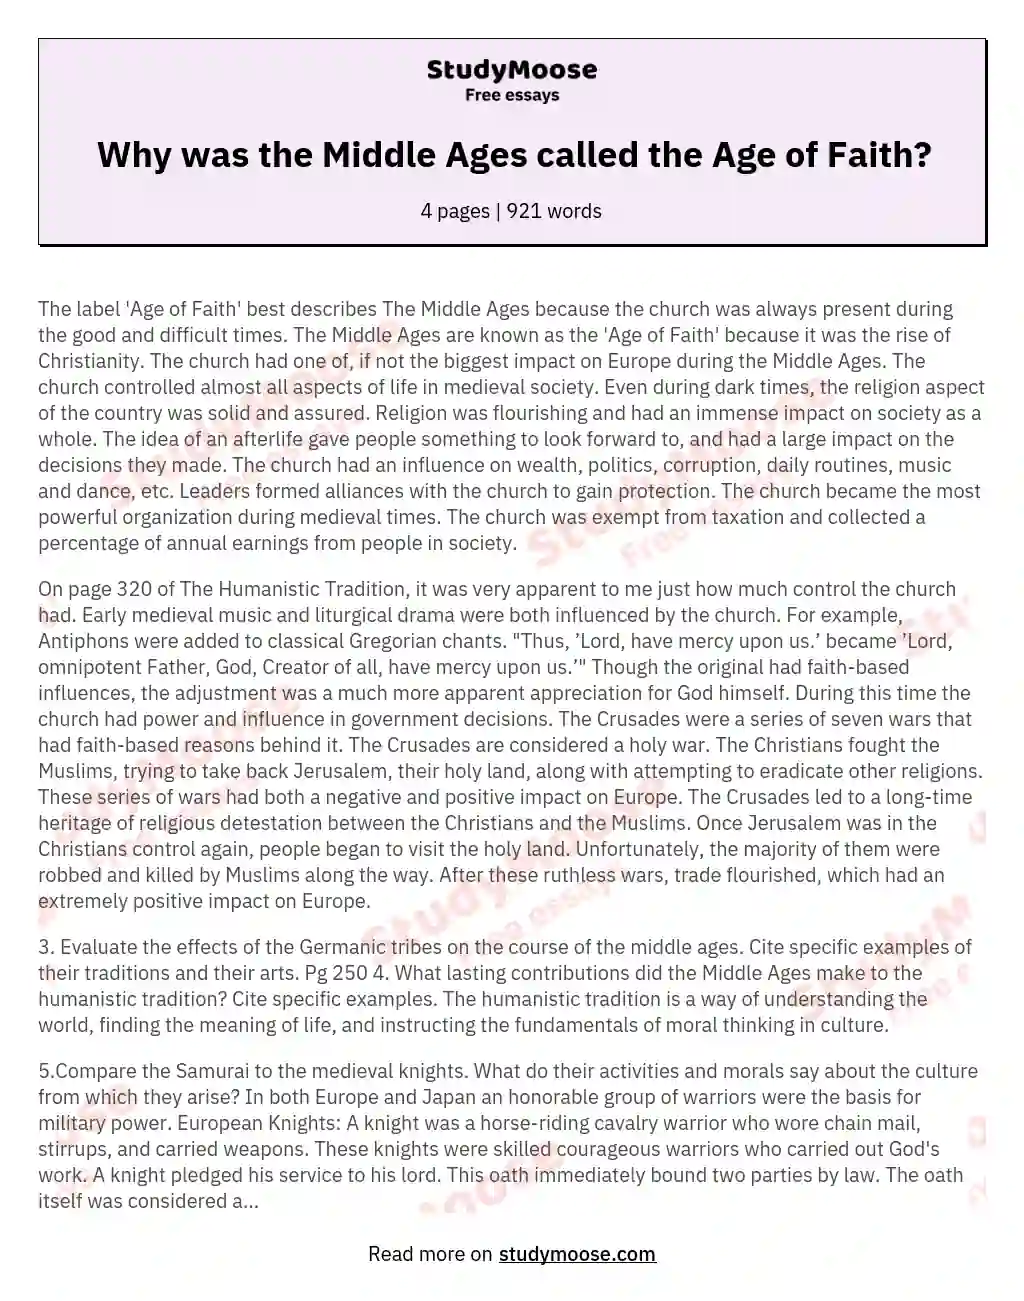 Why was the Middle Ages called the Age of Faith? essay